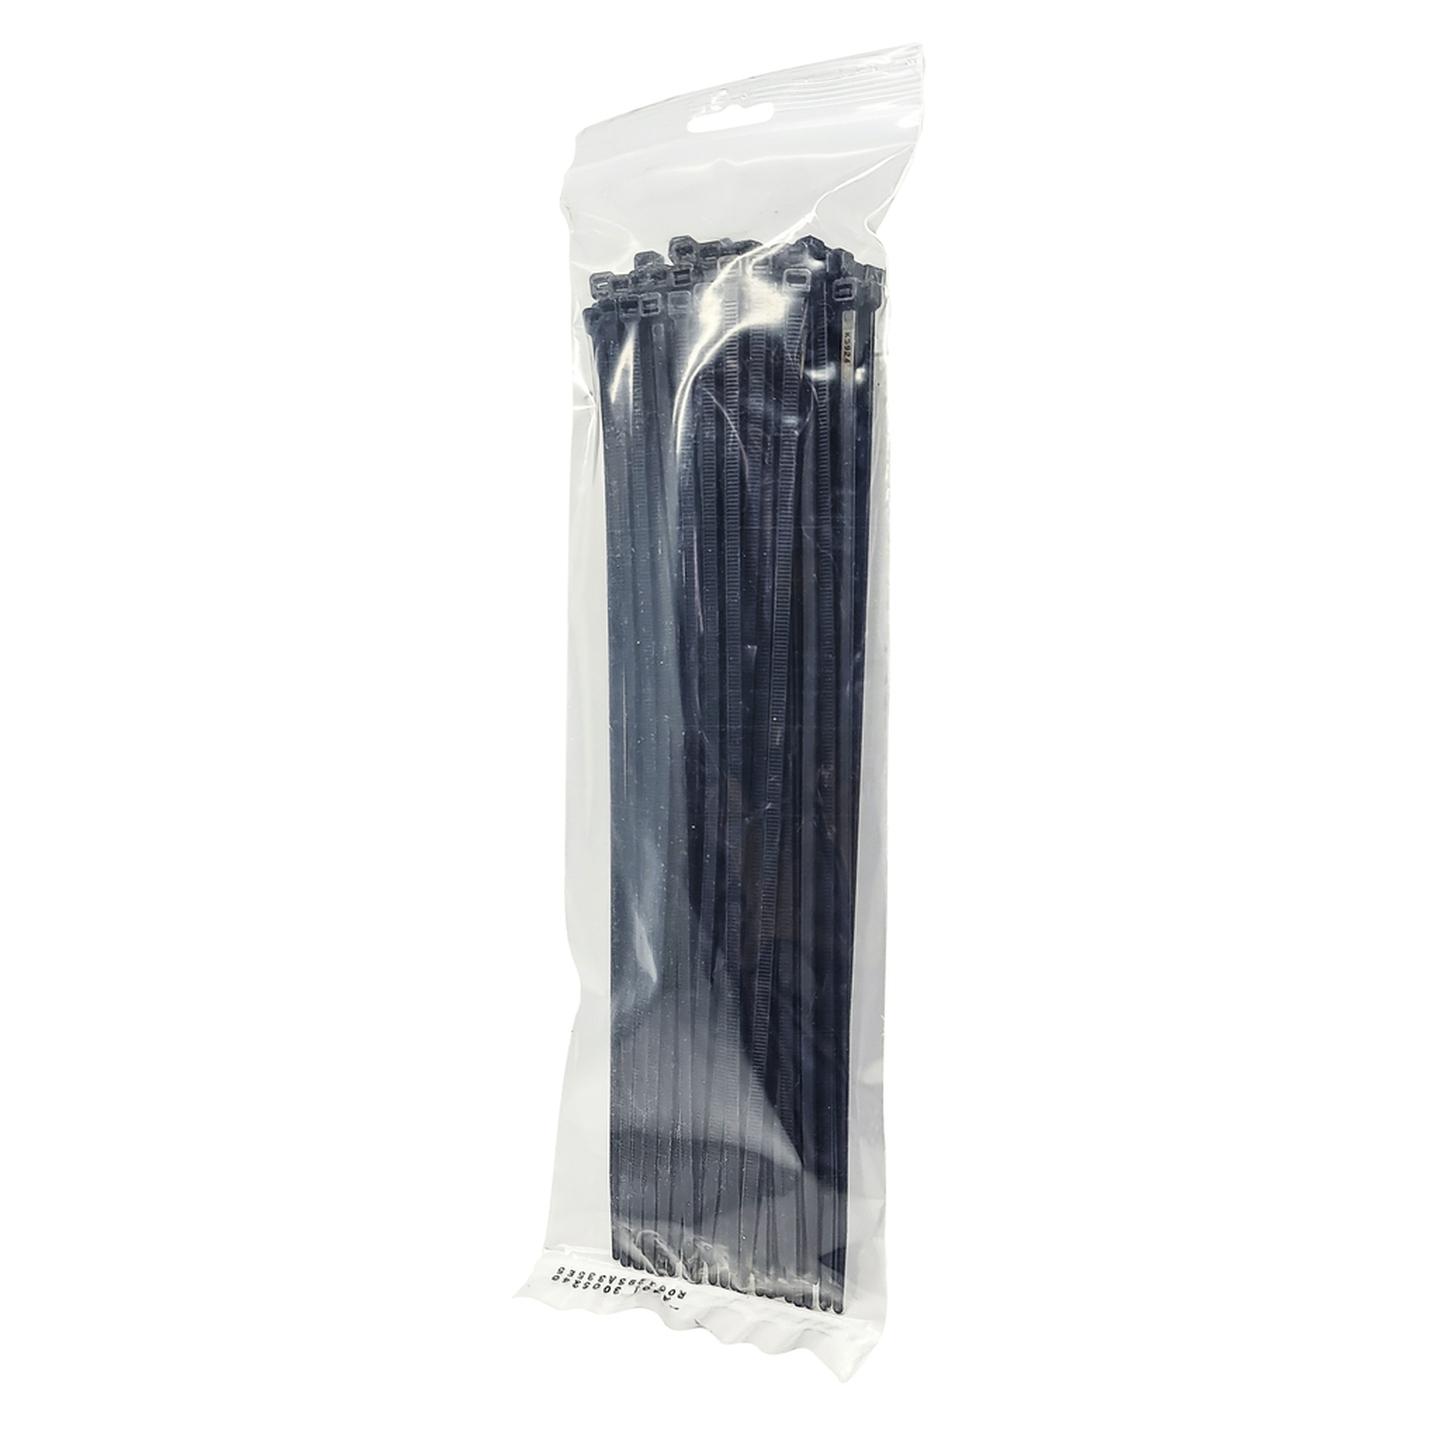 Cable Tie 300mm x 4.8mm pack of 100